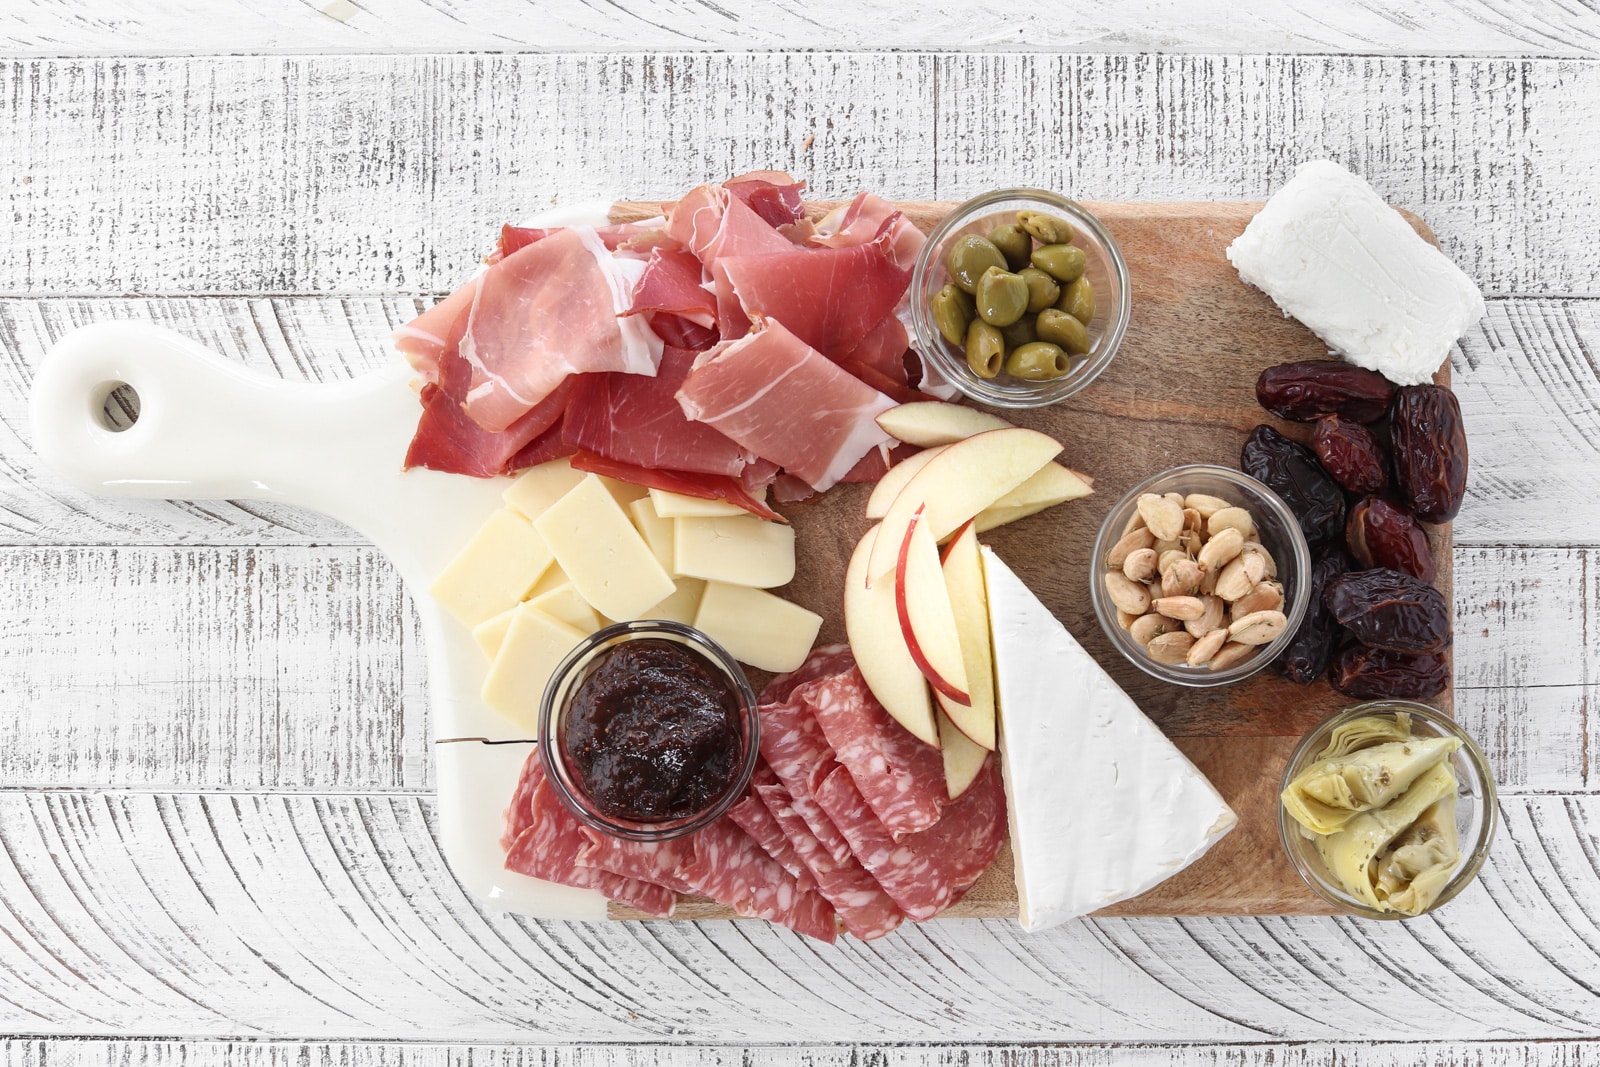 Step 5: Easy Charcuterie Board. Cutting board with almonds, artichokes, cheeses, smoked meats, apples, fig butter  and dates.